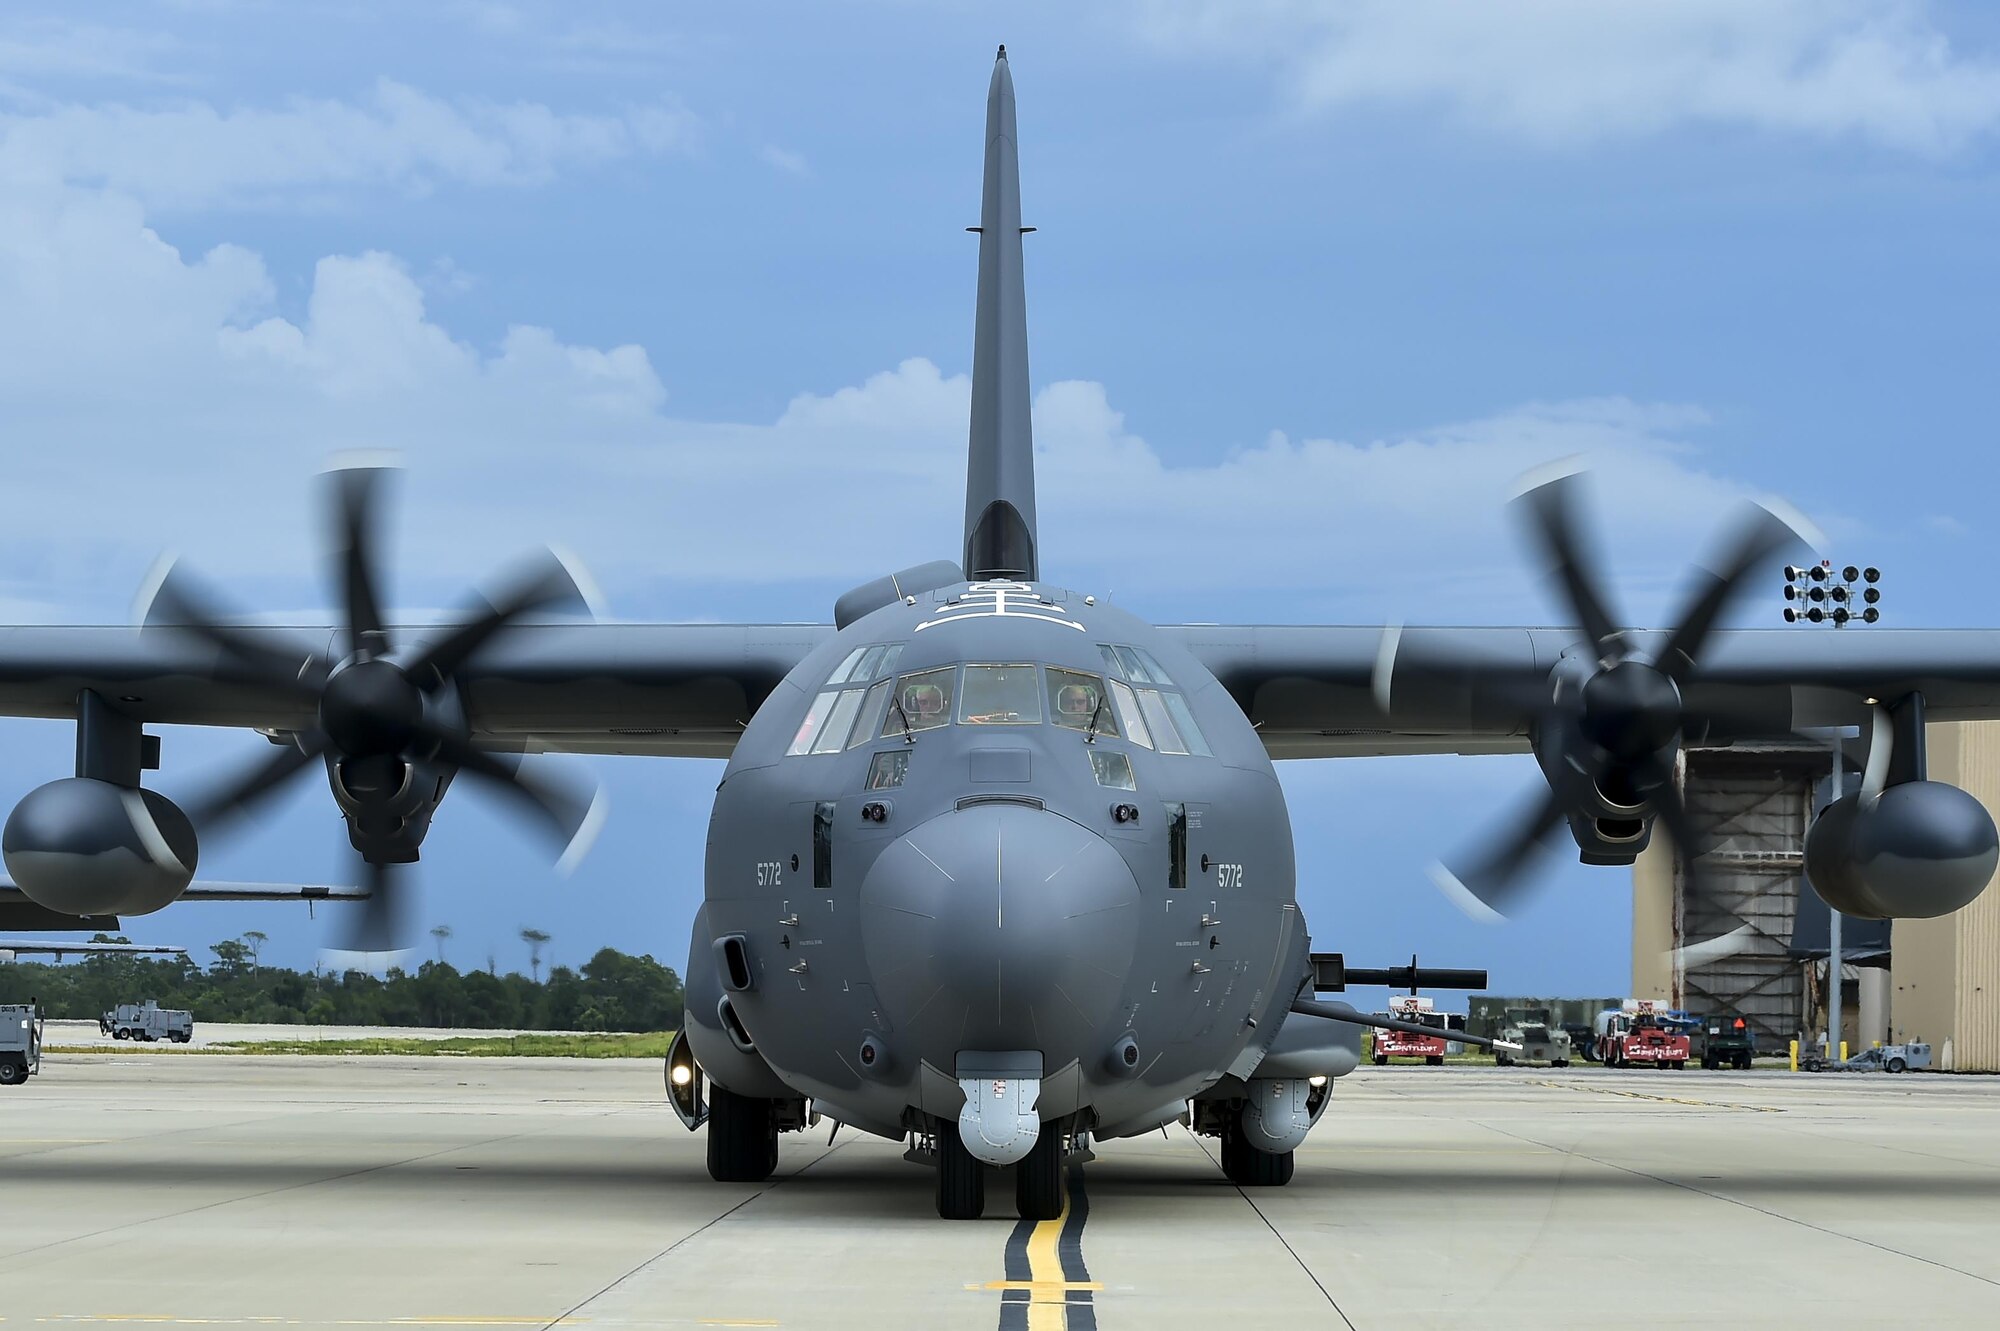 An AC-130J Ghostrider gunship, Block 20 model, shuts down after arriving to Hurlburt Field, Fla., for the first time July 18, 2016. The Block 20 version of the AC-130J is modified with the 105mm canon and will be operationally tested out of Hurlburt Field. The AC-130J will provide ground forces an expeditionary, direct-fire platform that is persistent, ideally suited for urban operations and delivers precision low-yield munitions against ground targets. (U.S. Air Force photo by Senior Airman Jeff Parkinson)